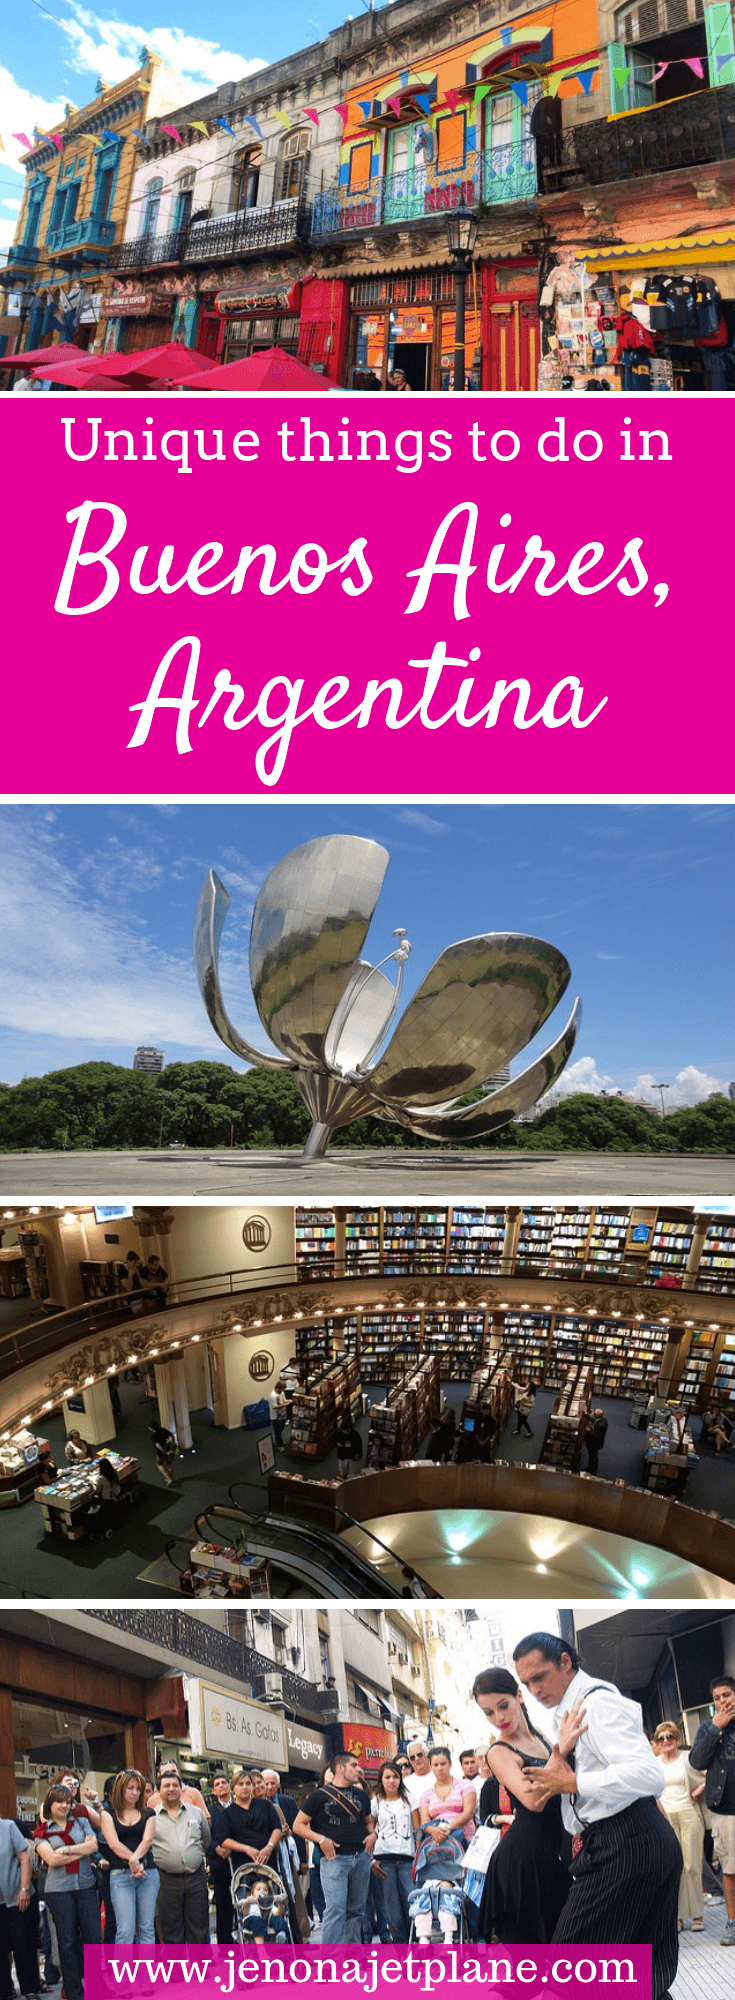 Looking for unique things to do in Buenos Aires, Argentina? From going on a parilla tour to visiting the grave of Eva Peron, these are 8 activities you won't want to miss. Save to your travel board for future reference. #argentinatravel #buenosairesargentina #buenosairestravel #buenosairesargentinathingstodo #buenosairesthingstodo #travelsouthamerica